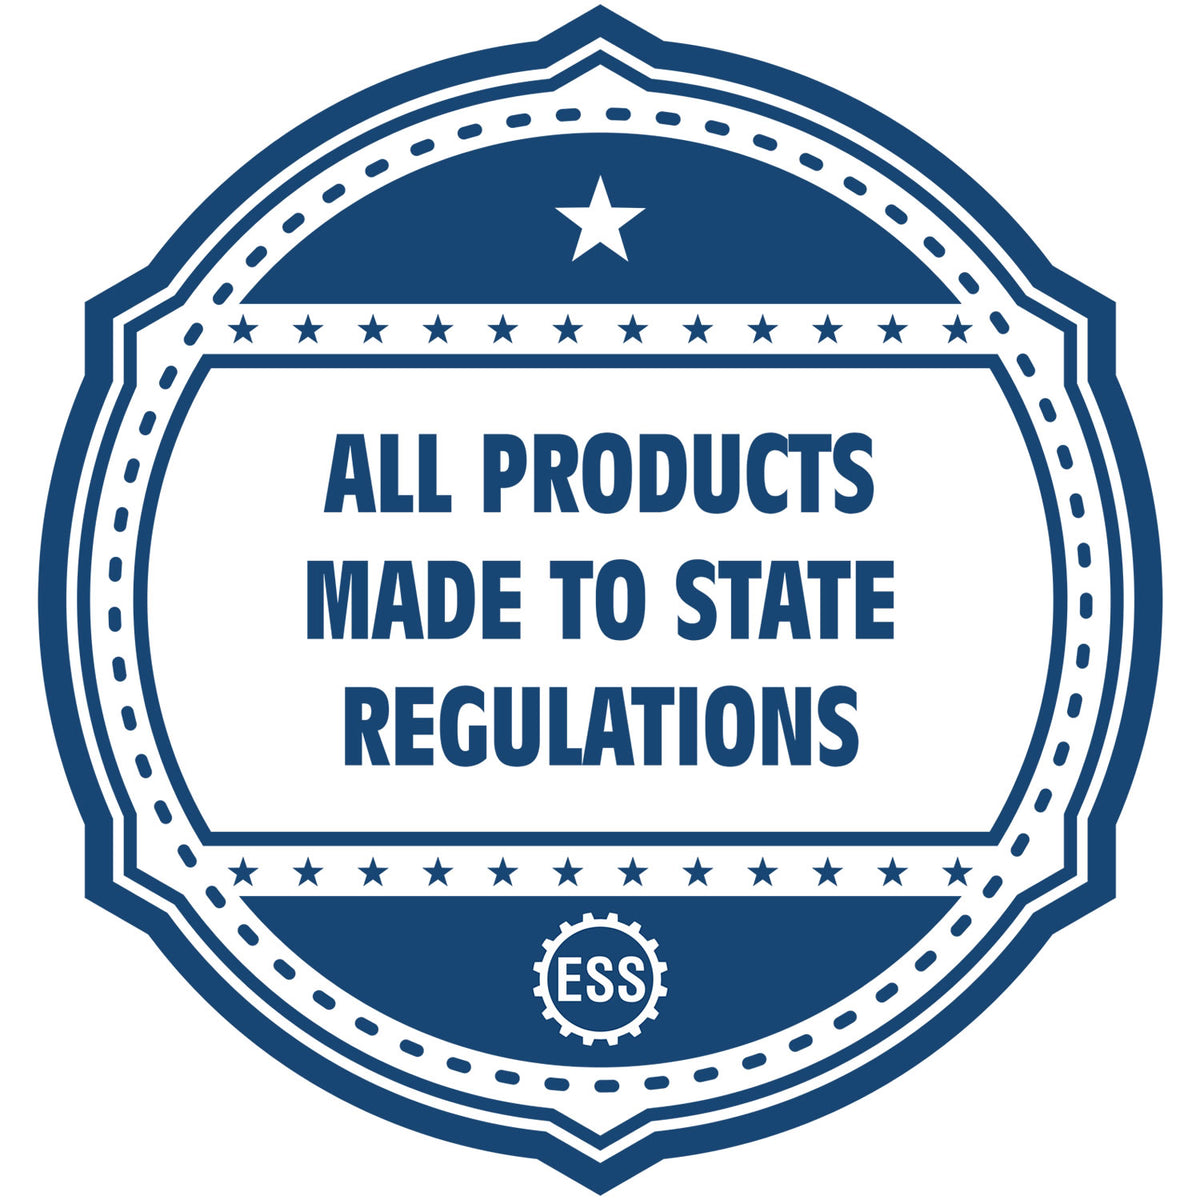 An icon or badge element for the State of Washington Architectural Seal Embosser showing that this product is made in compliance with state regulations.